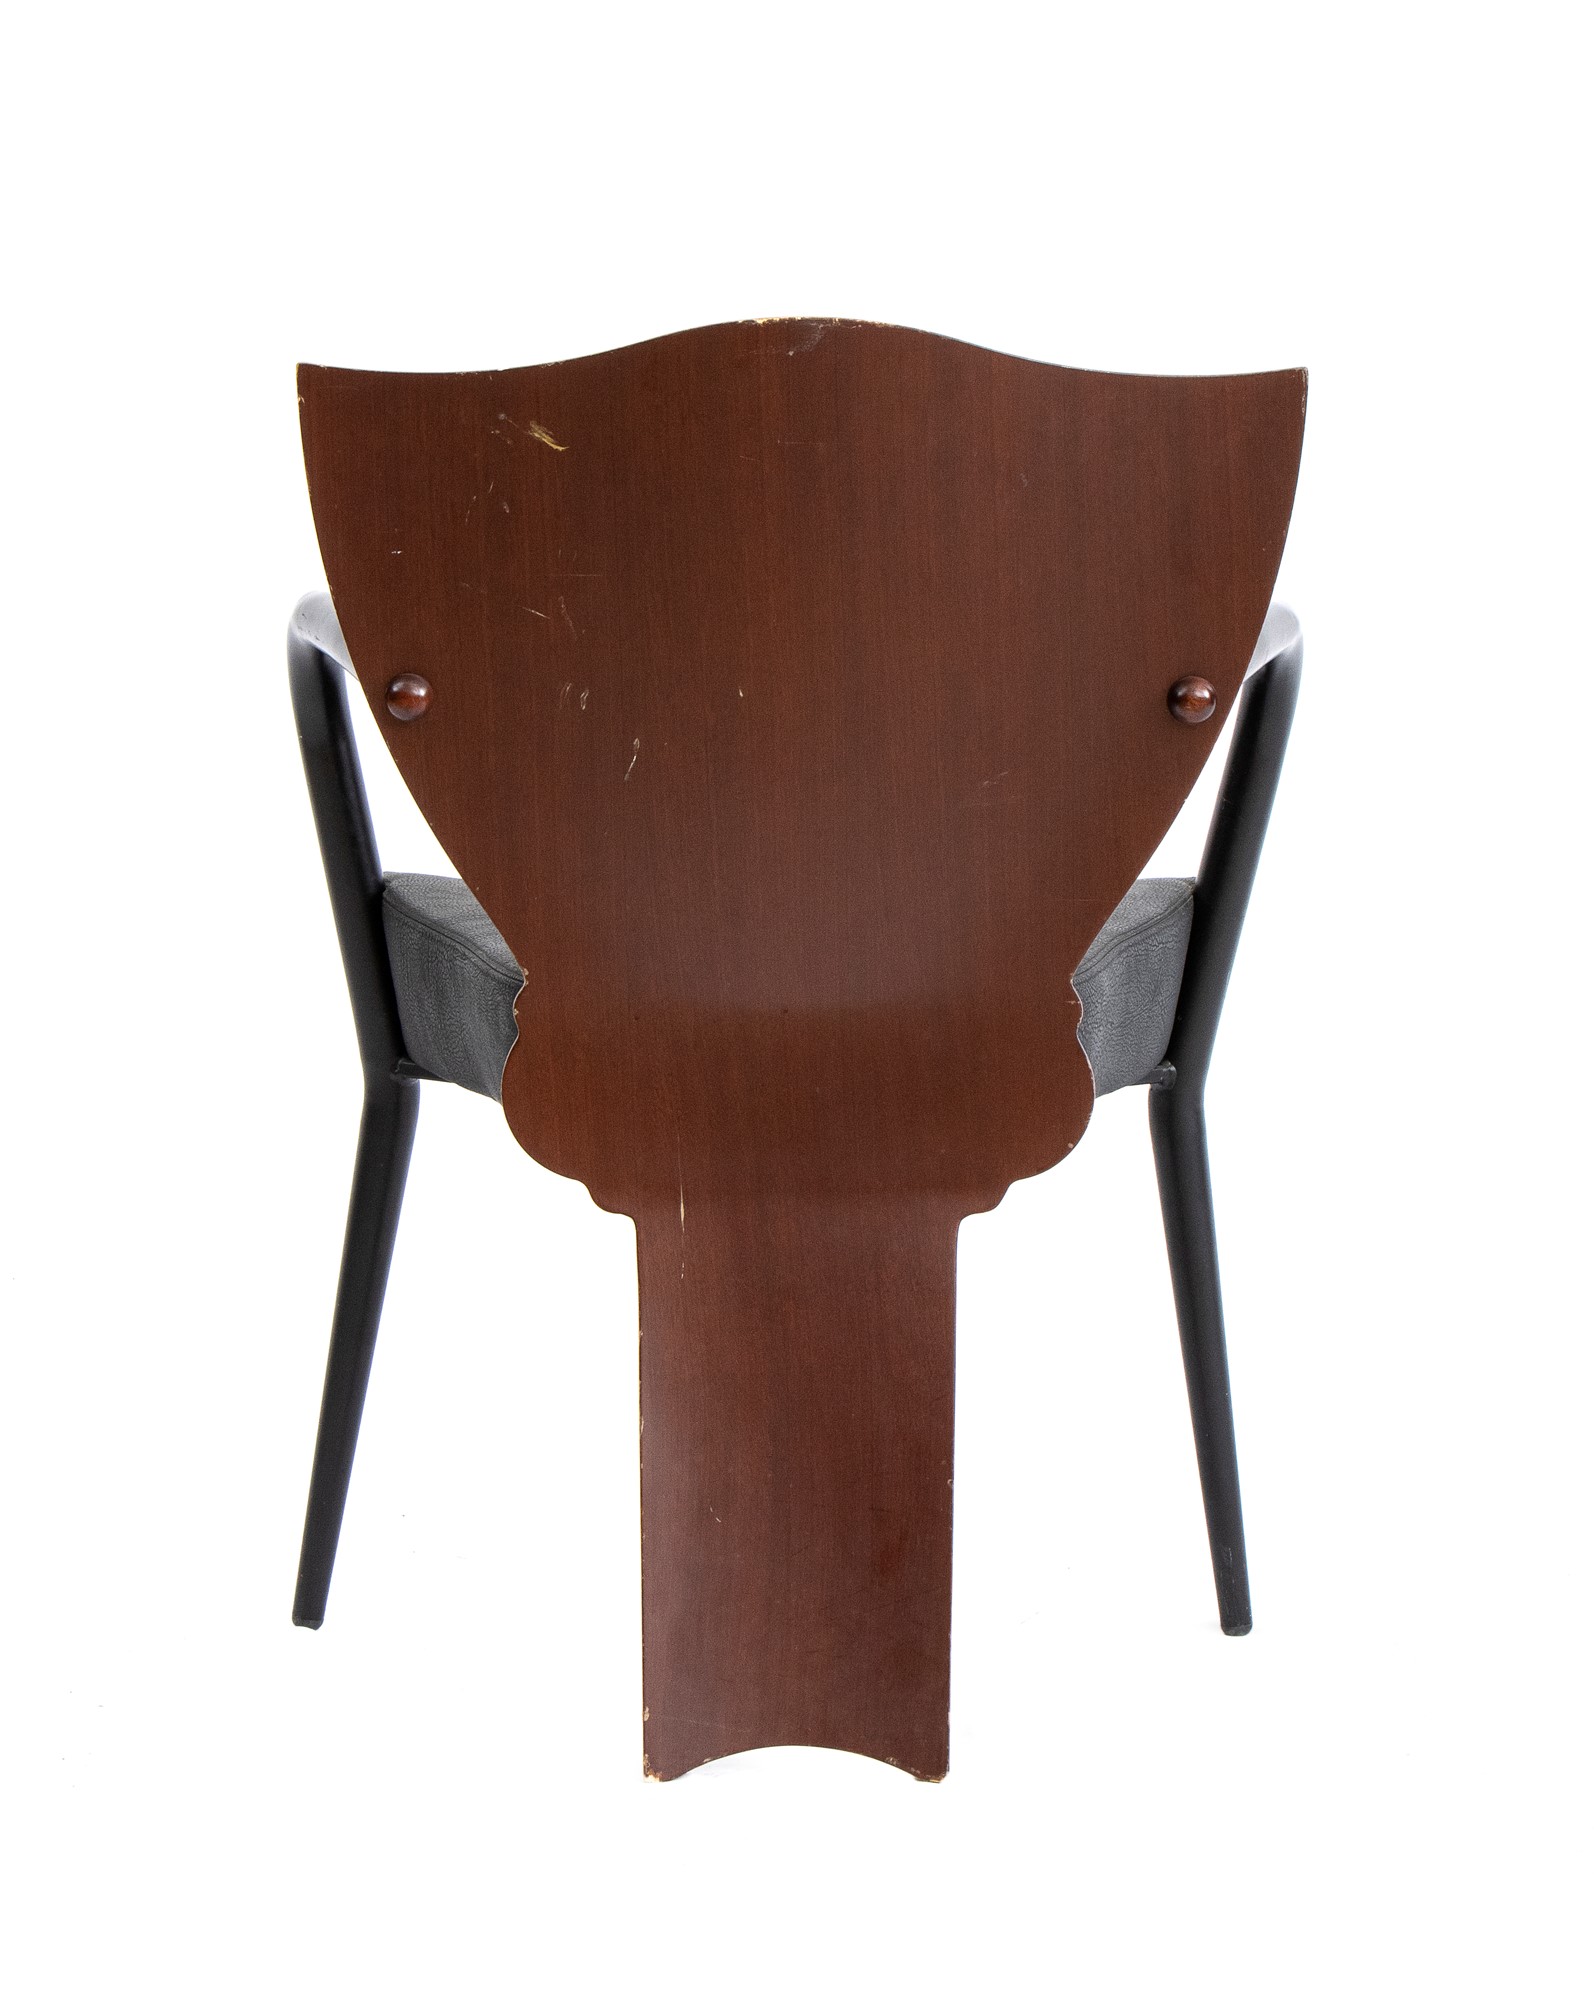 Four chairs mod. Dalami - Image 11 of 15